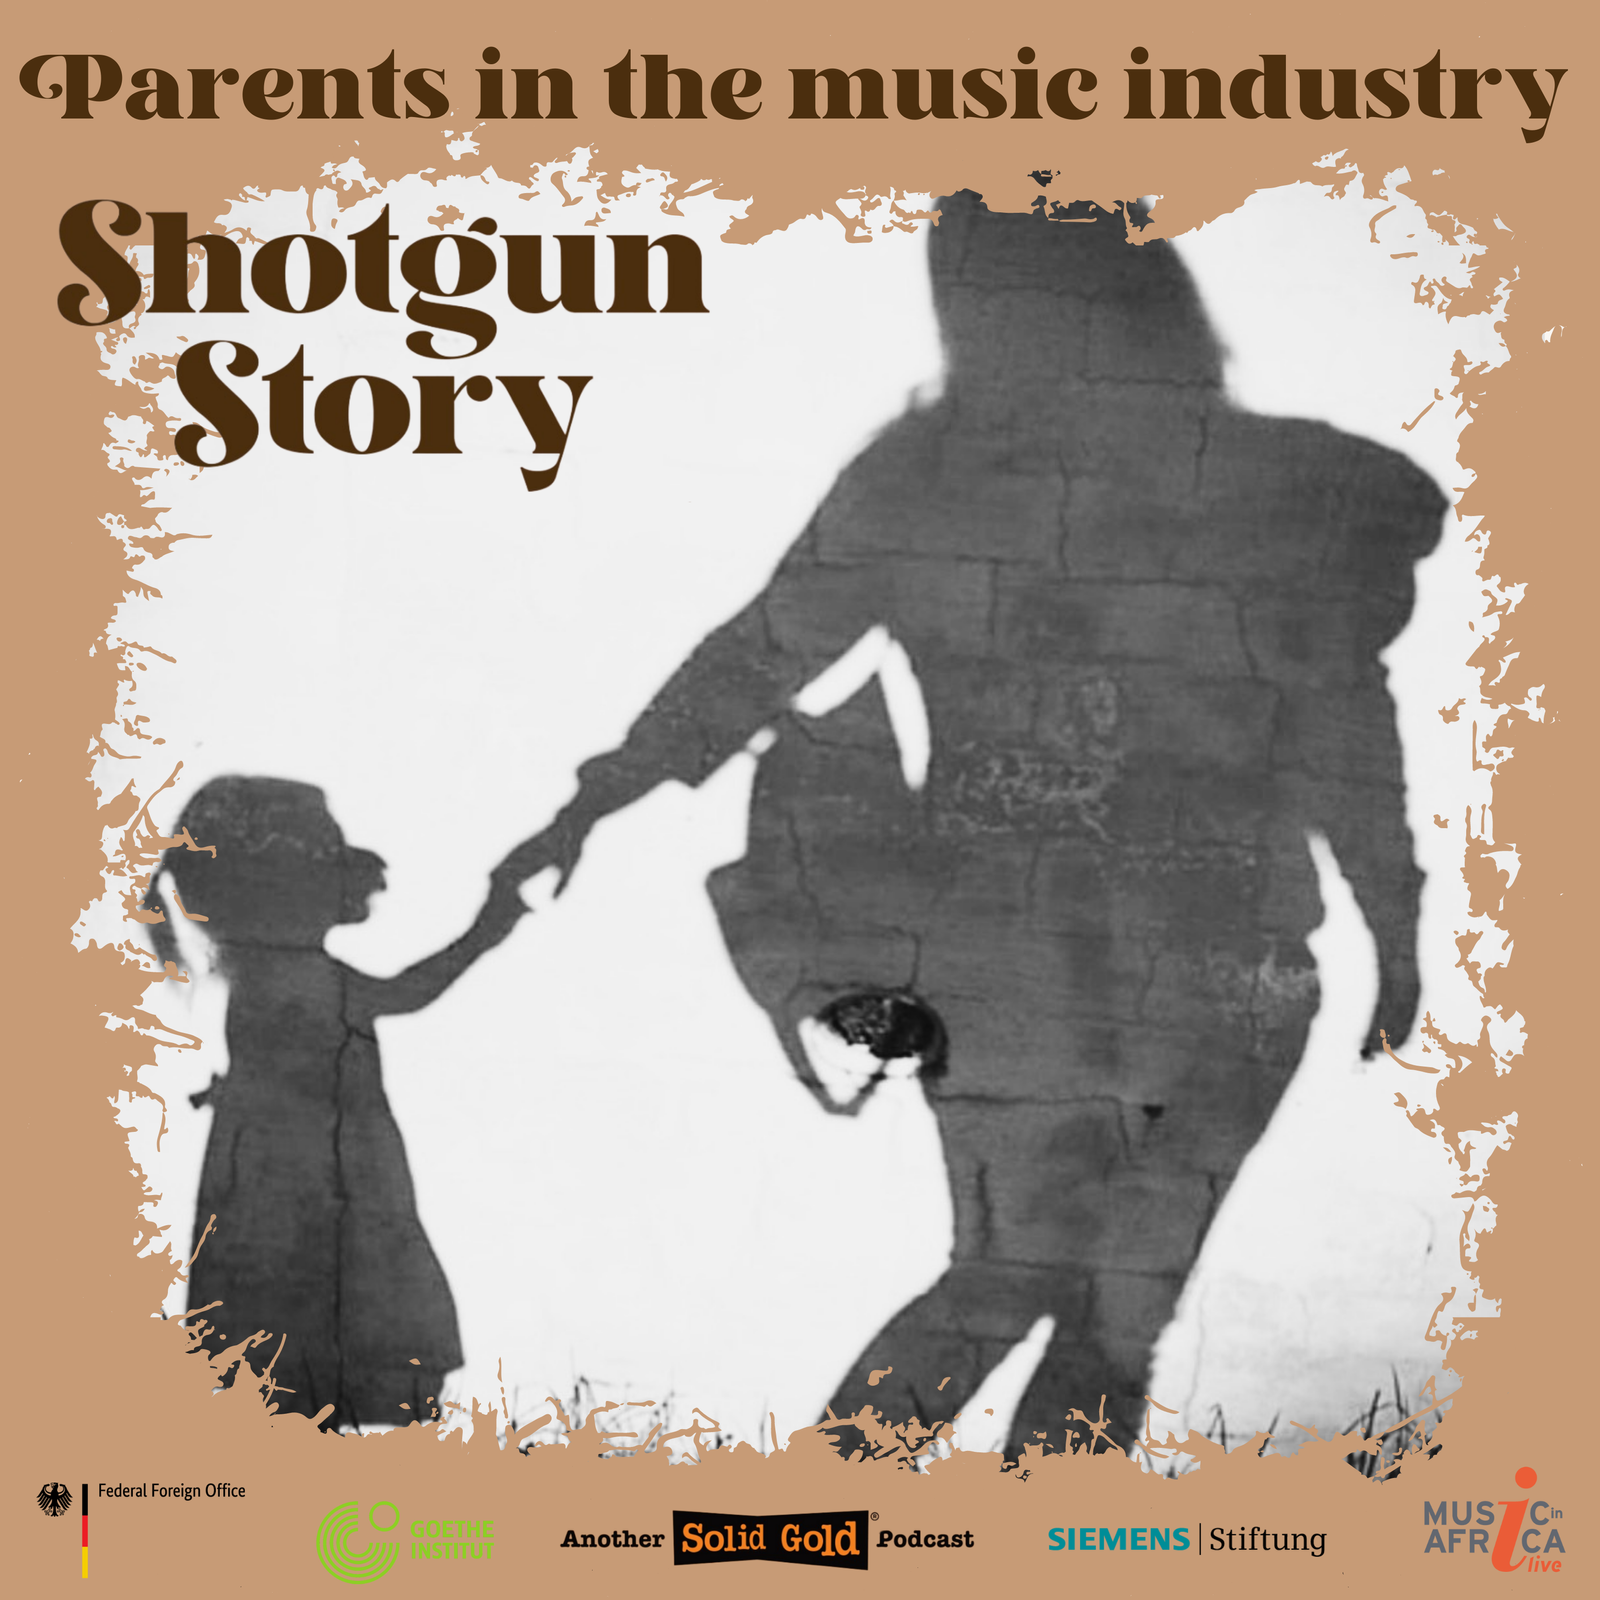 Shotgun Story - parents in the music industry